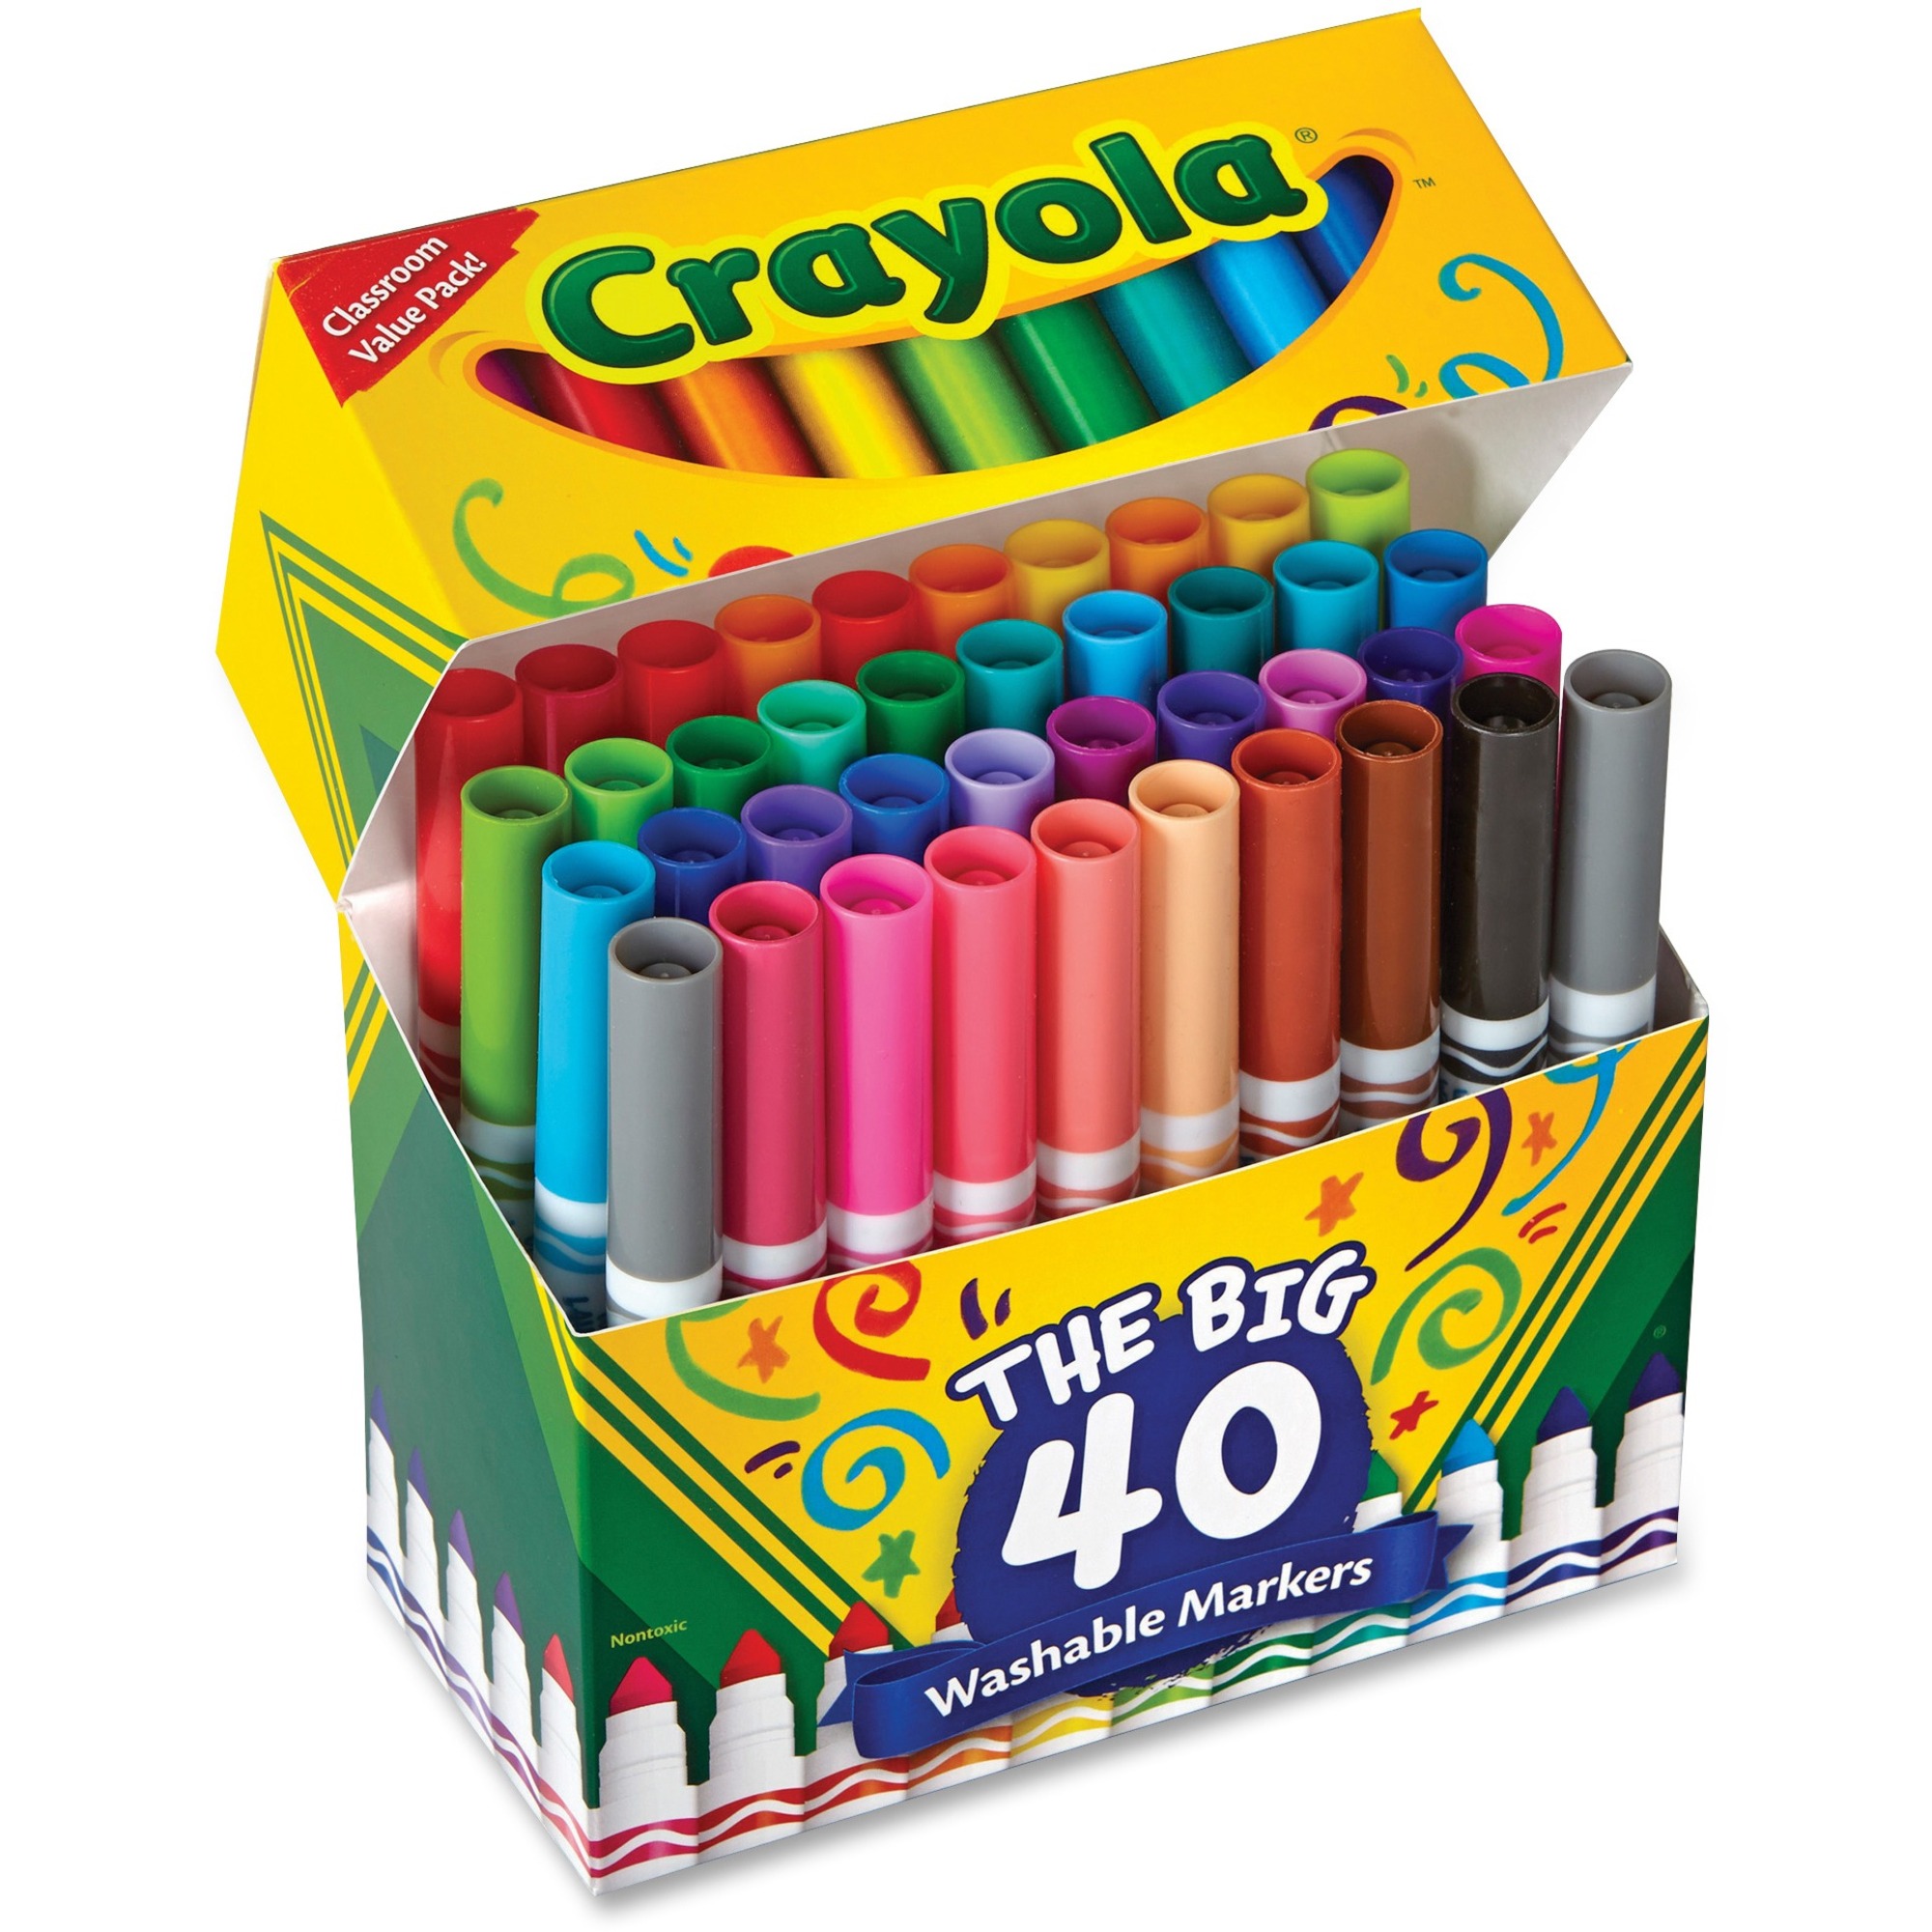 Marker　Solution　Total　40　Style　Crayola　Office　West　Art　Crayola,　Assorted　Markers　Texas　Ultra-Clean　LLC　Conical　Markers　Washable　of　Point　Set